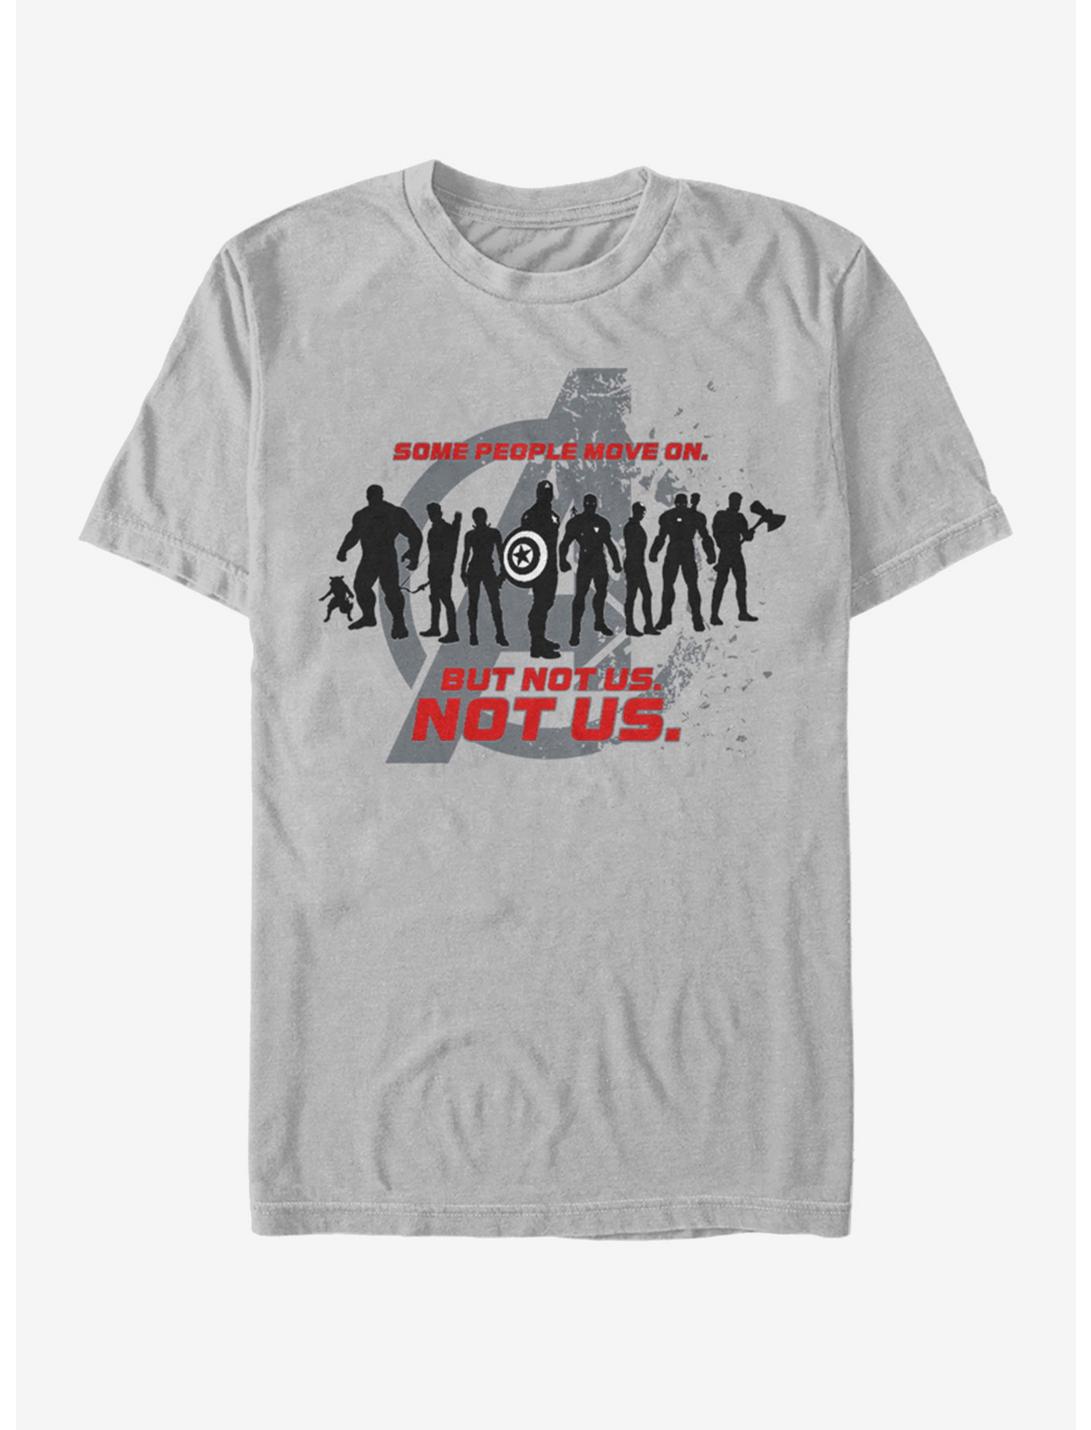 Marvel Avengers: Endgame Some People Move On T-Shirt, SILVER, hi-res